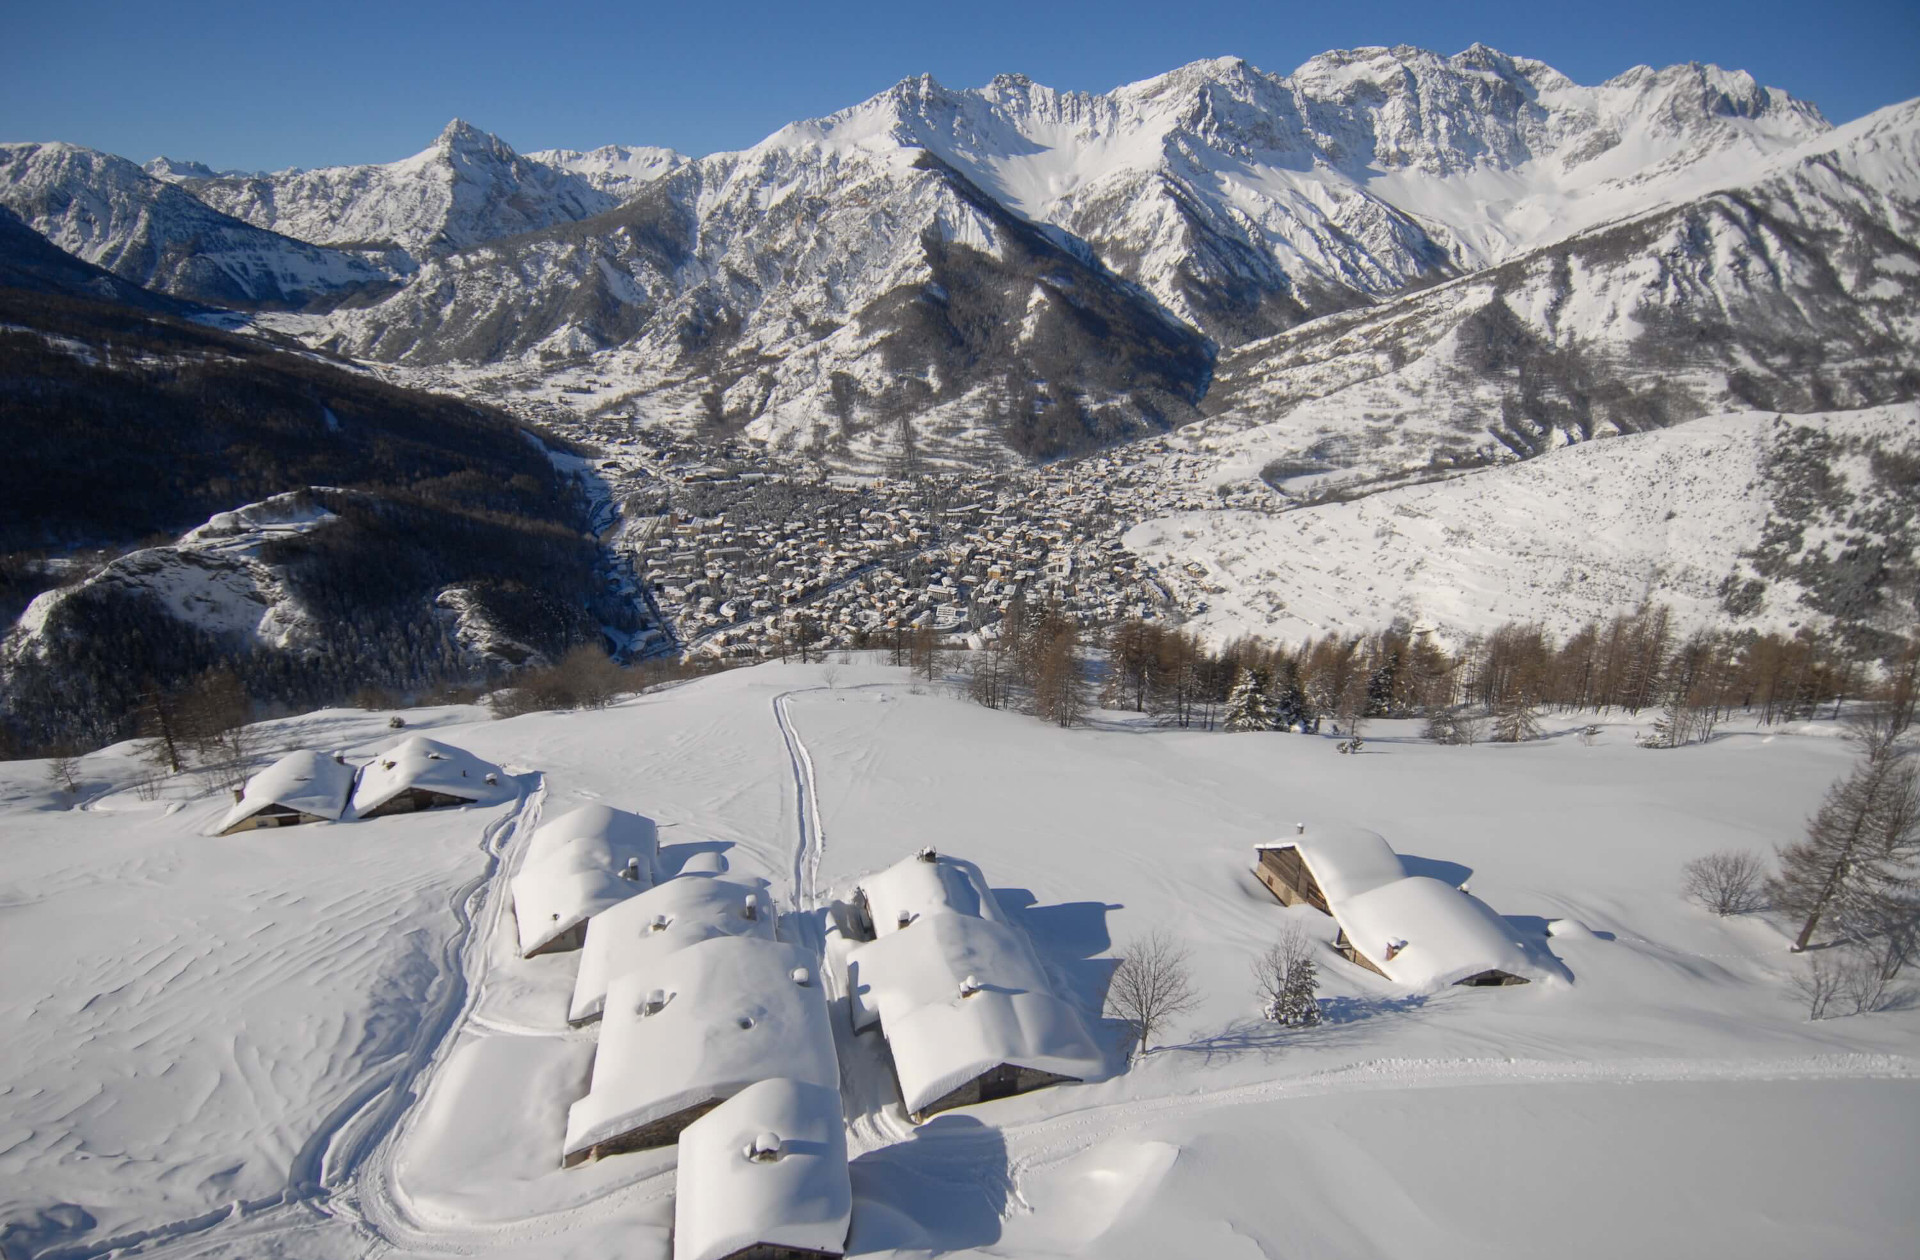 BOOK YOUR HOLIDAY IN BARDONECCHIA WITH THE DISCOUNT VOUCHER OF THE PIEDMONT REGION